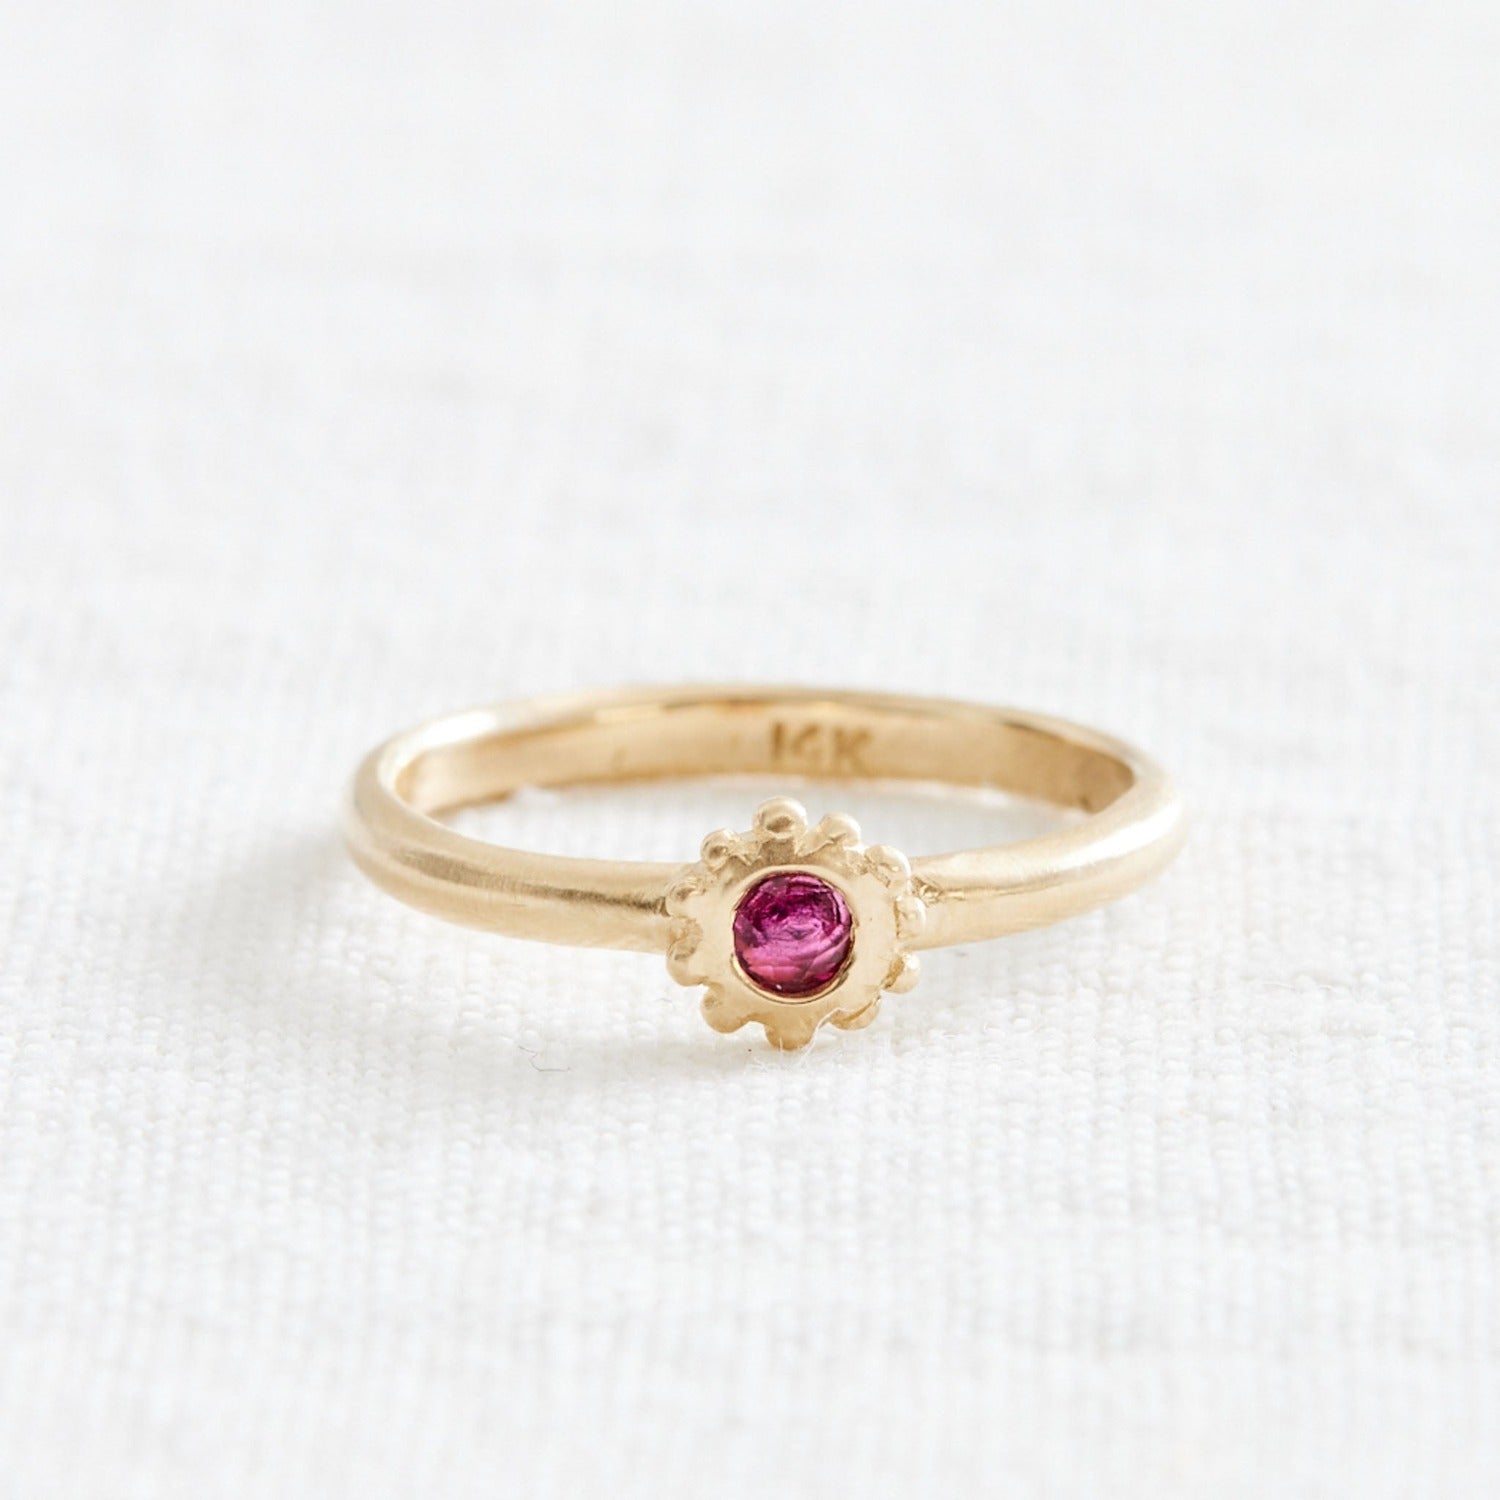 gold ring with pink stone and gold granulations about it